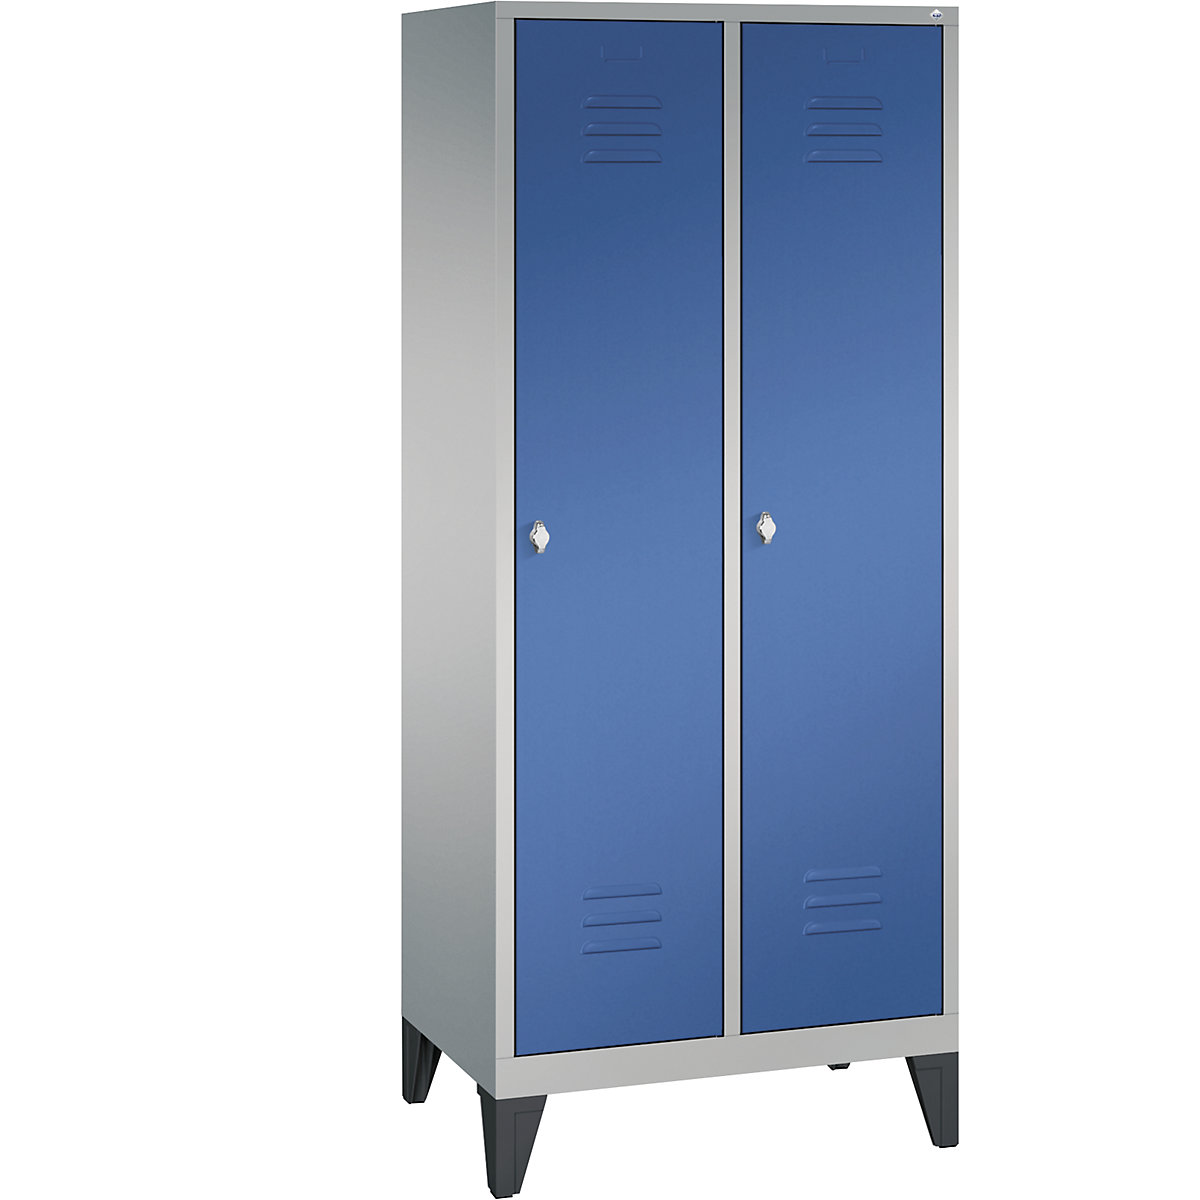 CLASSIC storage cupboard with feet – C+P, 2 compartments, compartment width 400 mm, white aluminium / gentian blue-8